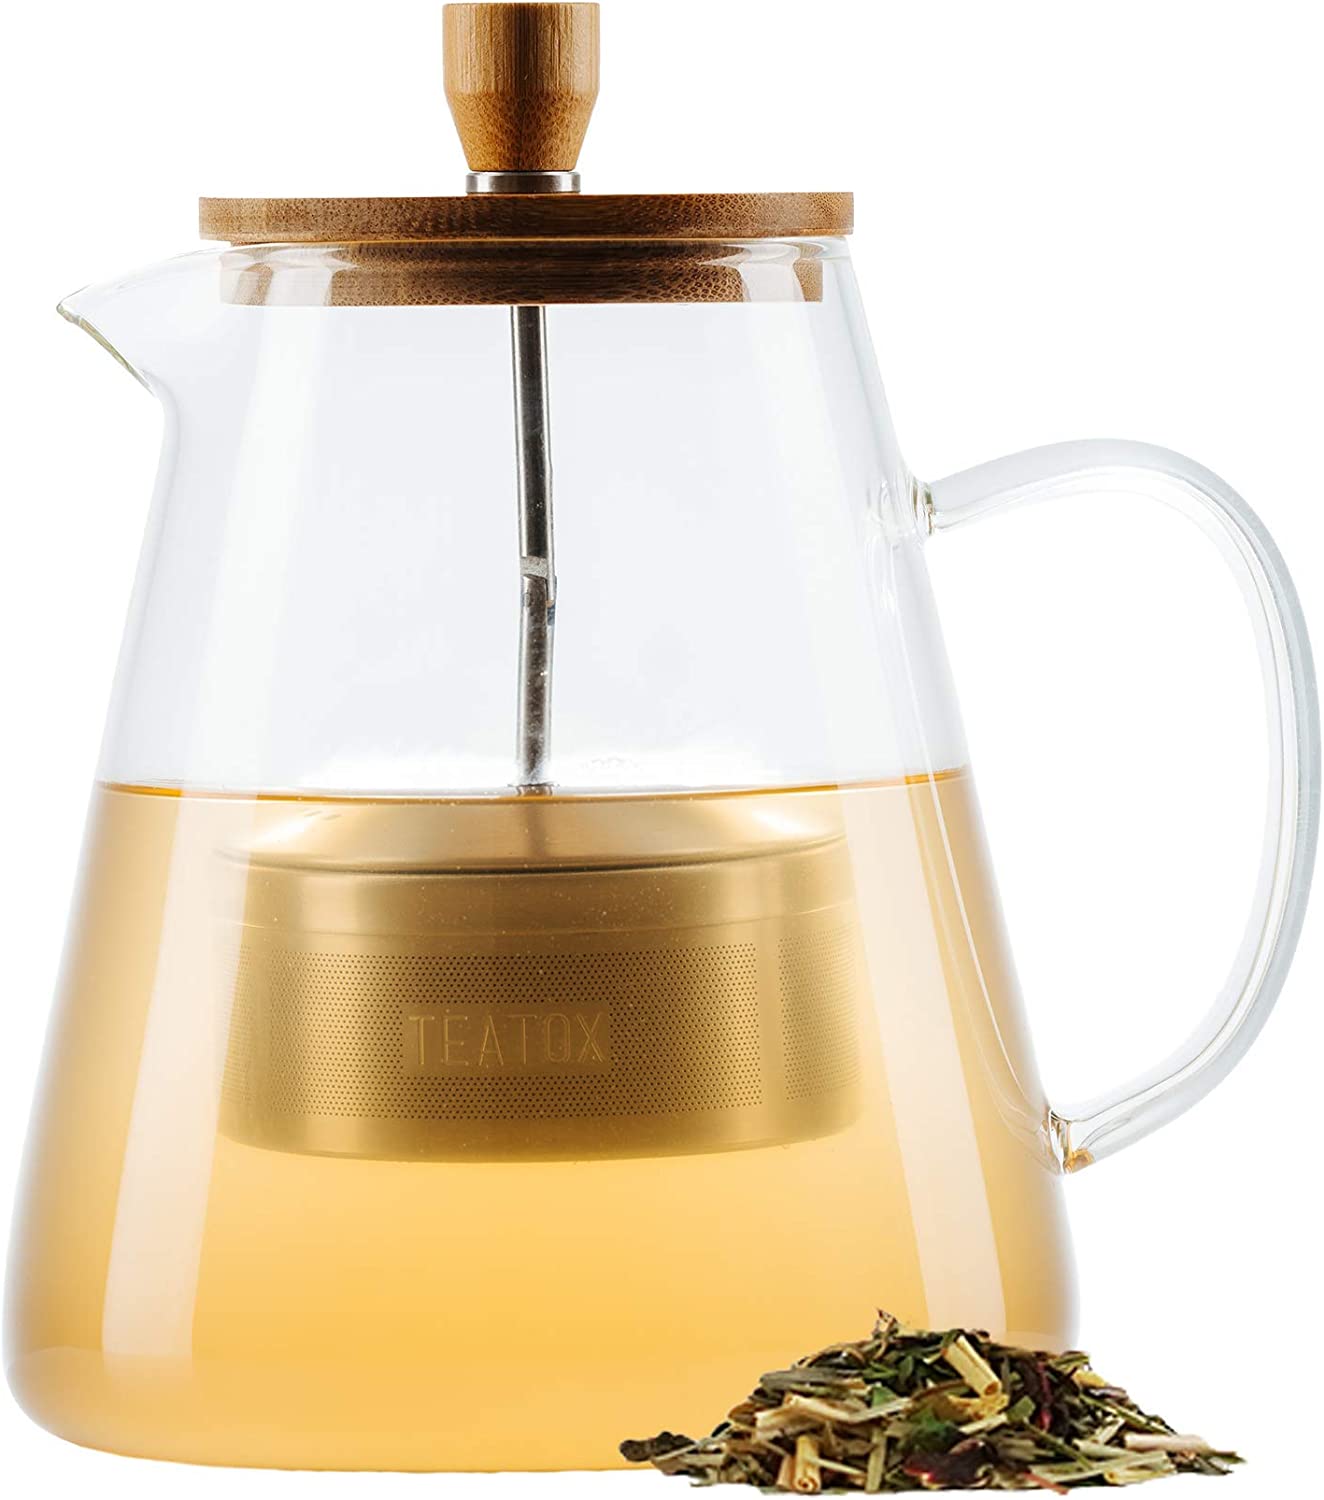 TEATOX® Glass teapot with lid and strainer insert, 1.5 litres, practical glass tea maker, the perfect tea accessory with bamboo lid, tea maker as a gift and for home, with stainless steel strainer